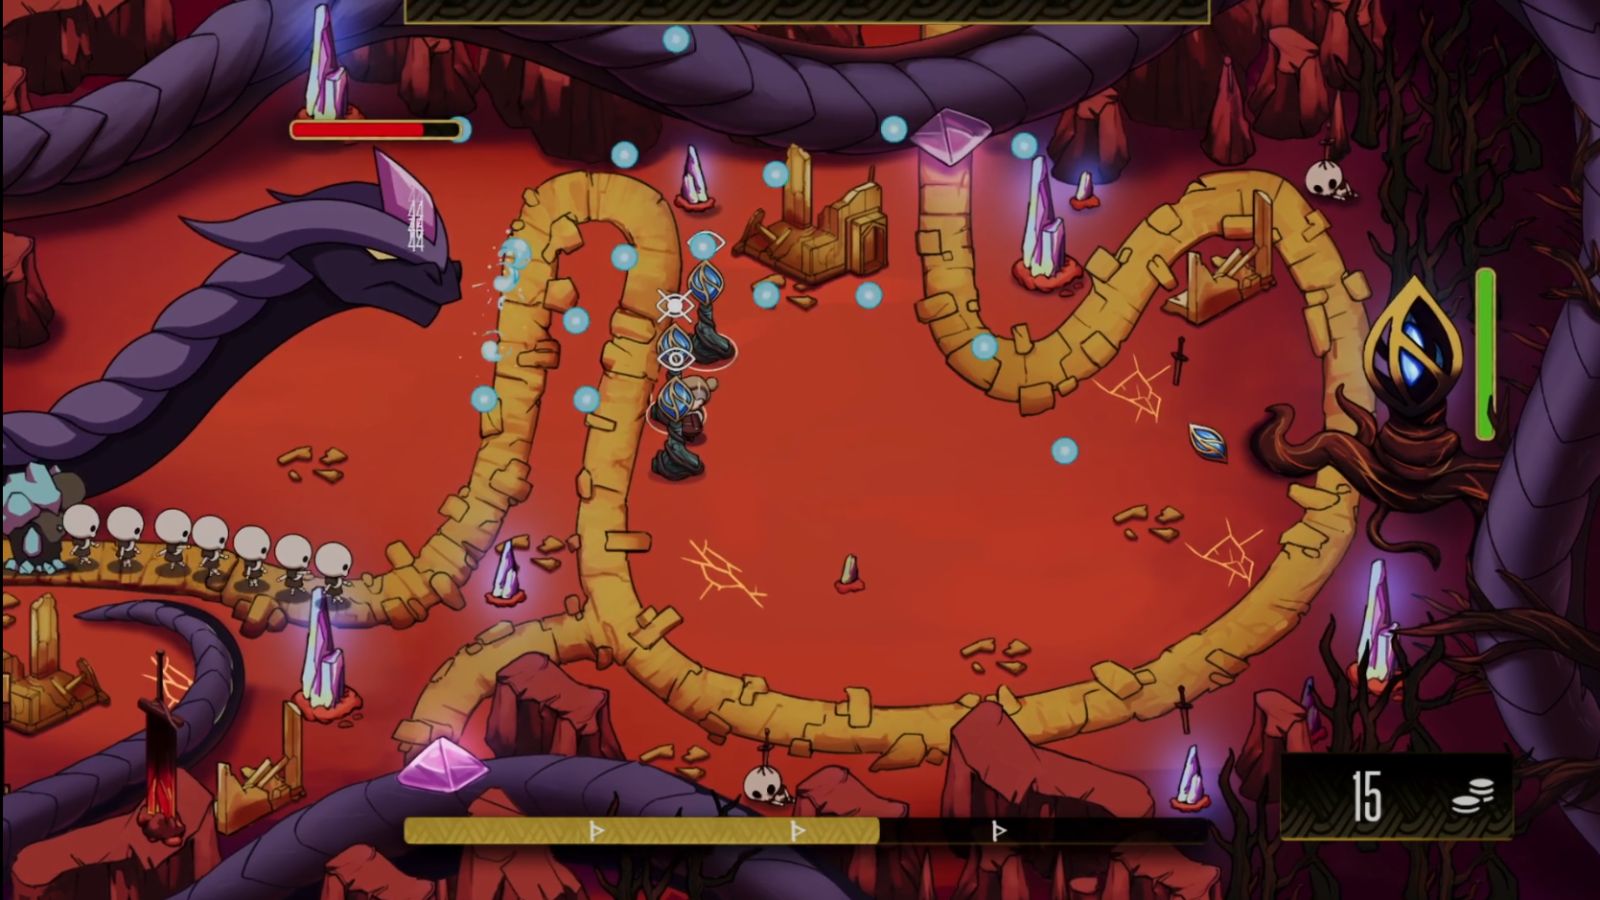 In-game player surrounded by a massive snake boss.